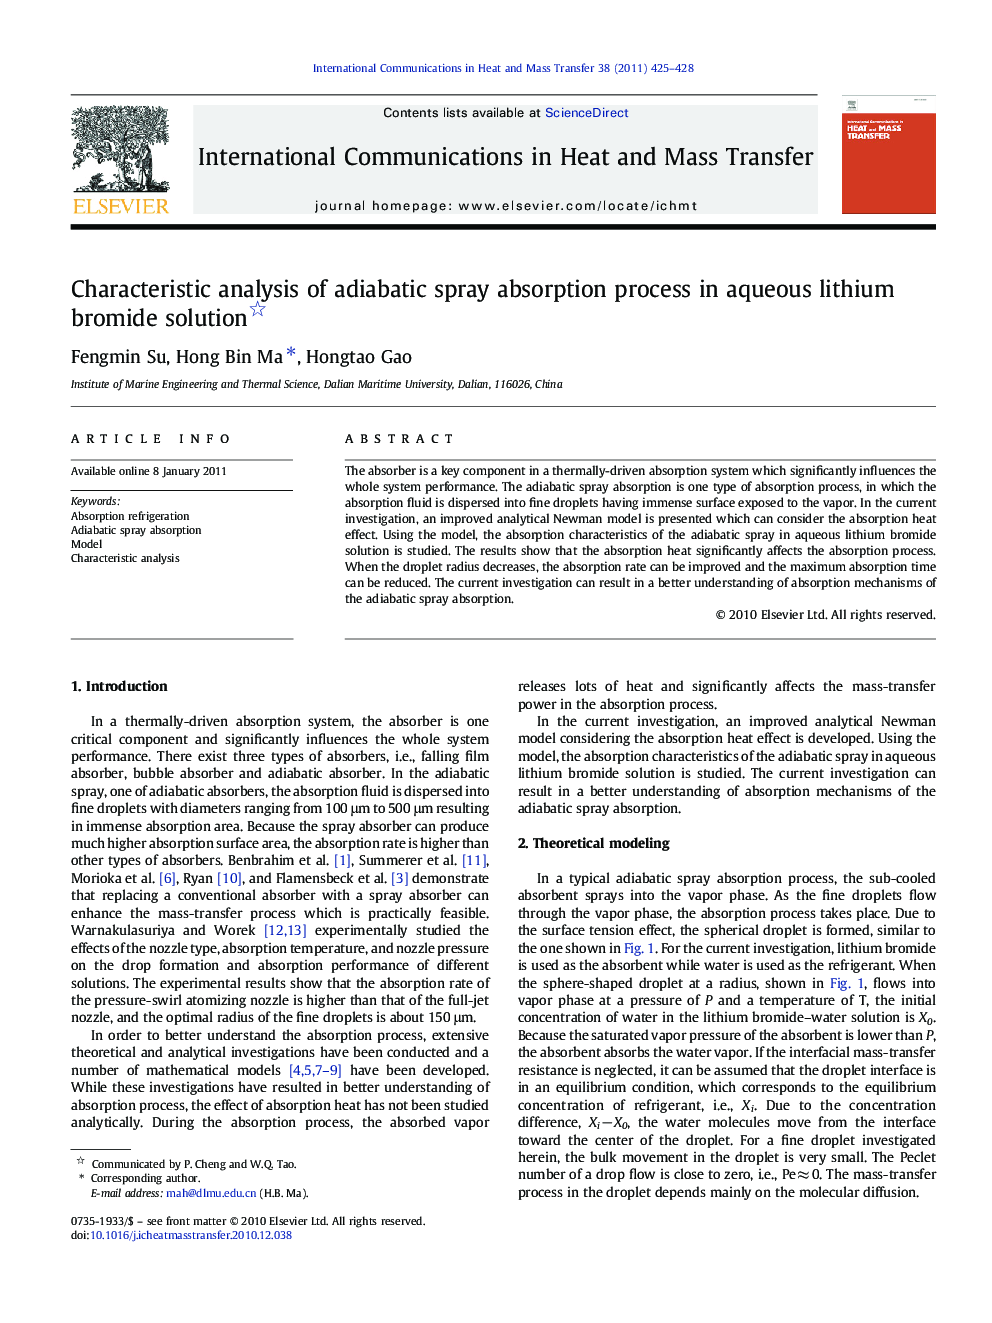 Characteristic analysis of adiabatic spray absorption process in aqueous lithium bromide solution 